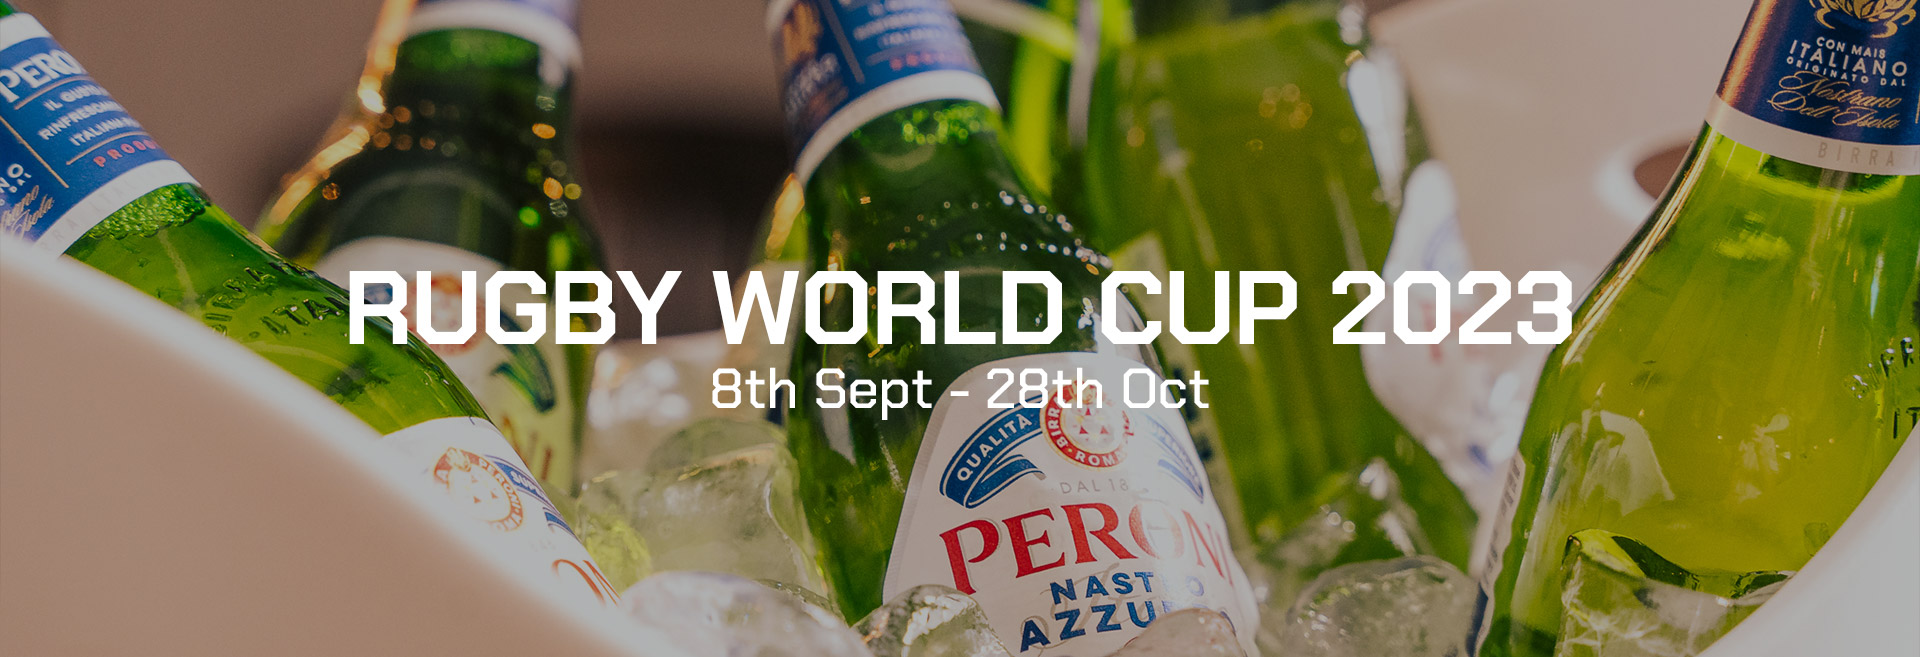 Watch the Rugby World Cup at The Forth Hotel